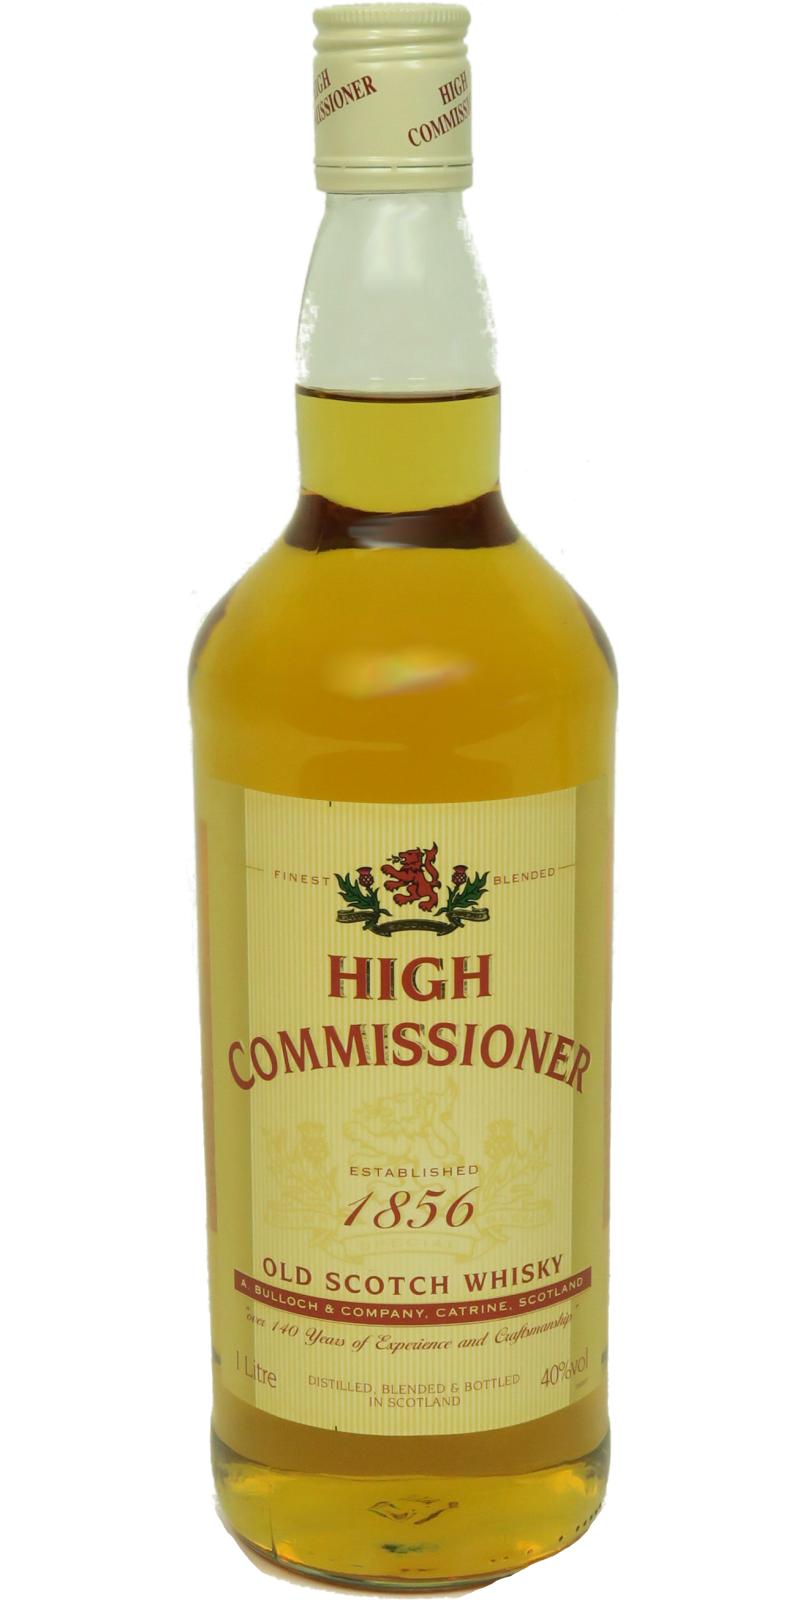 High Commissioner Old Scotch Whisky 40% 1000ml